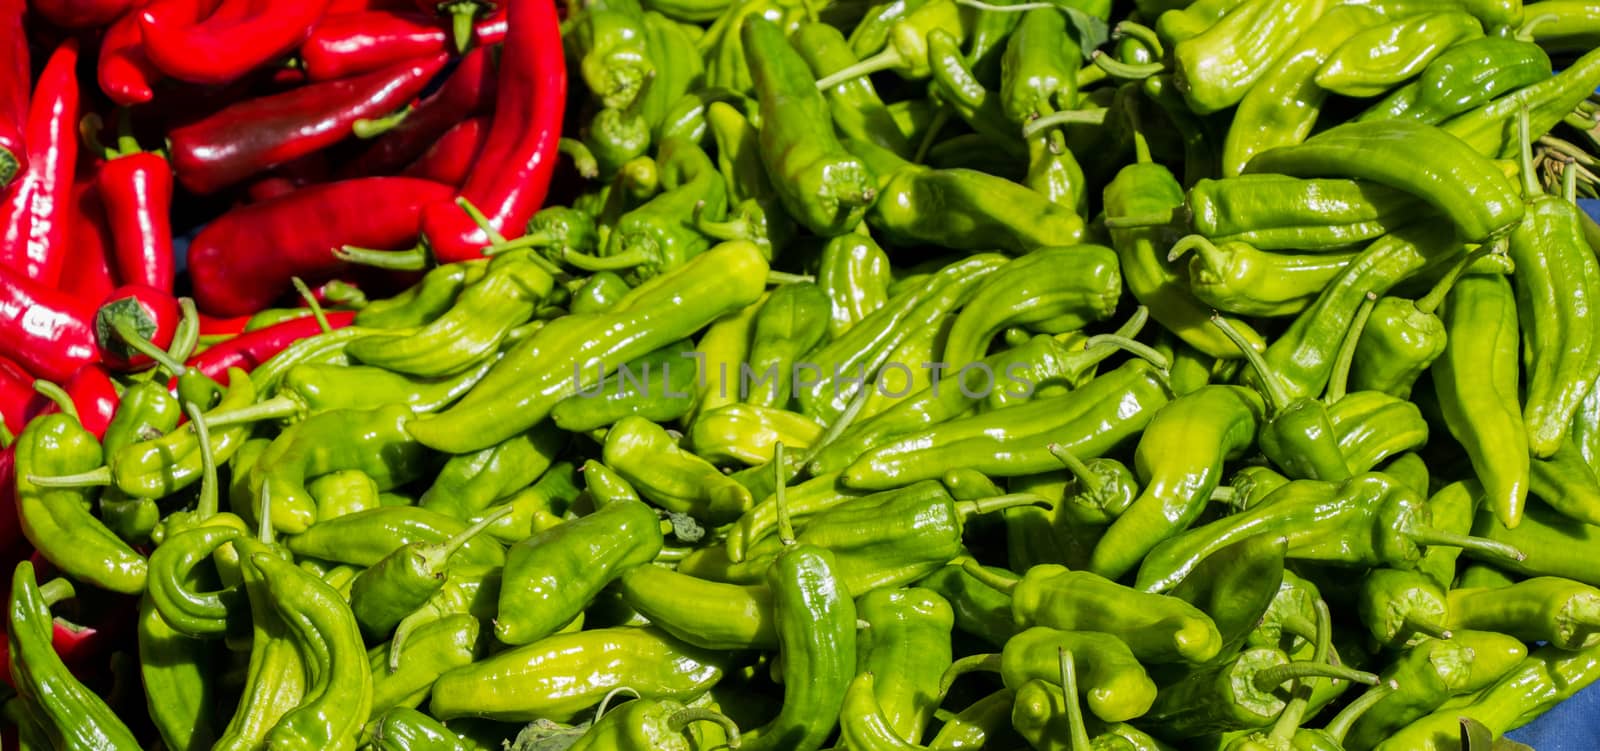 Green pepper found at the market stand by berkay